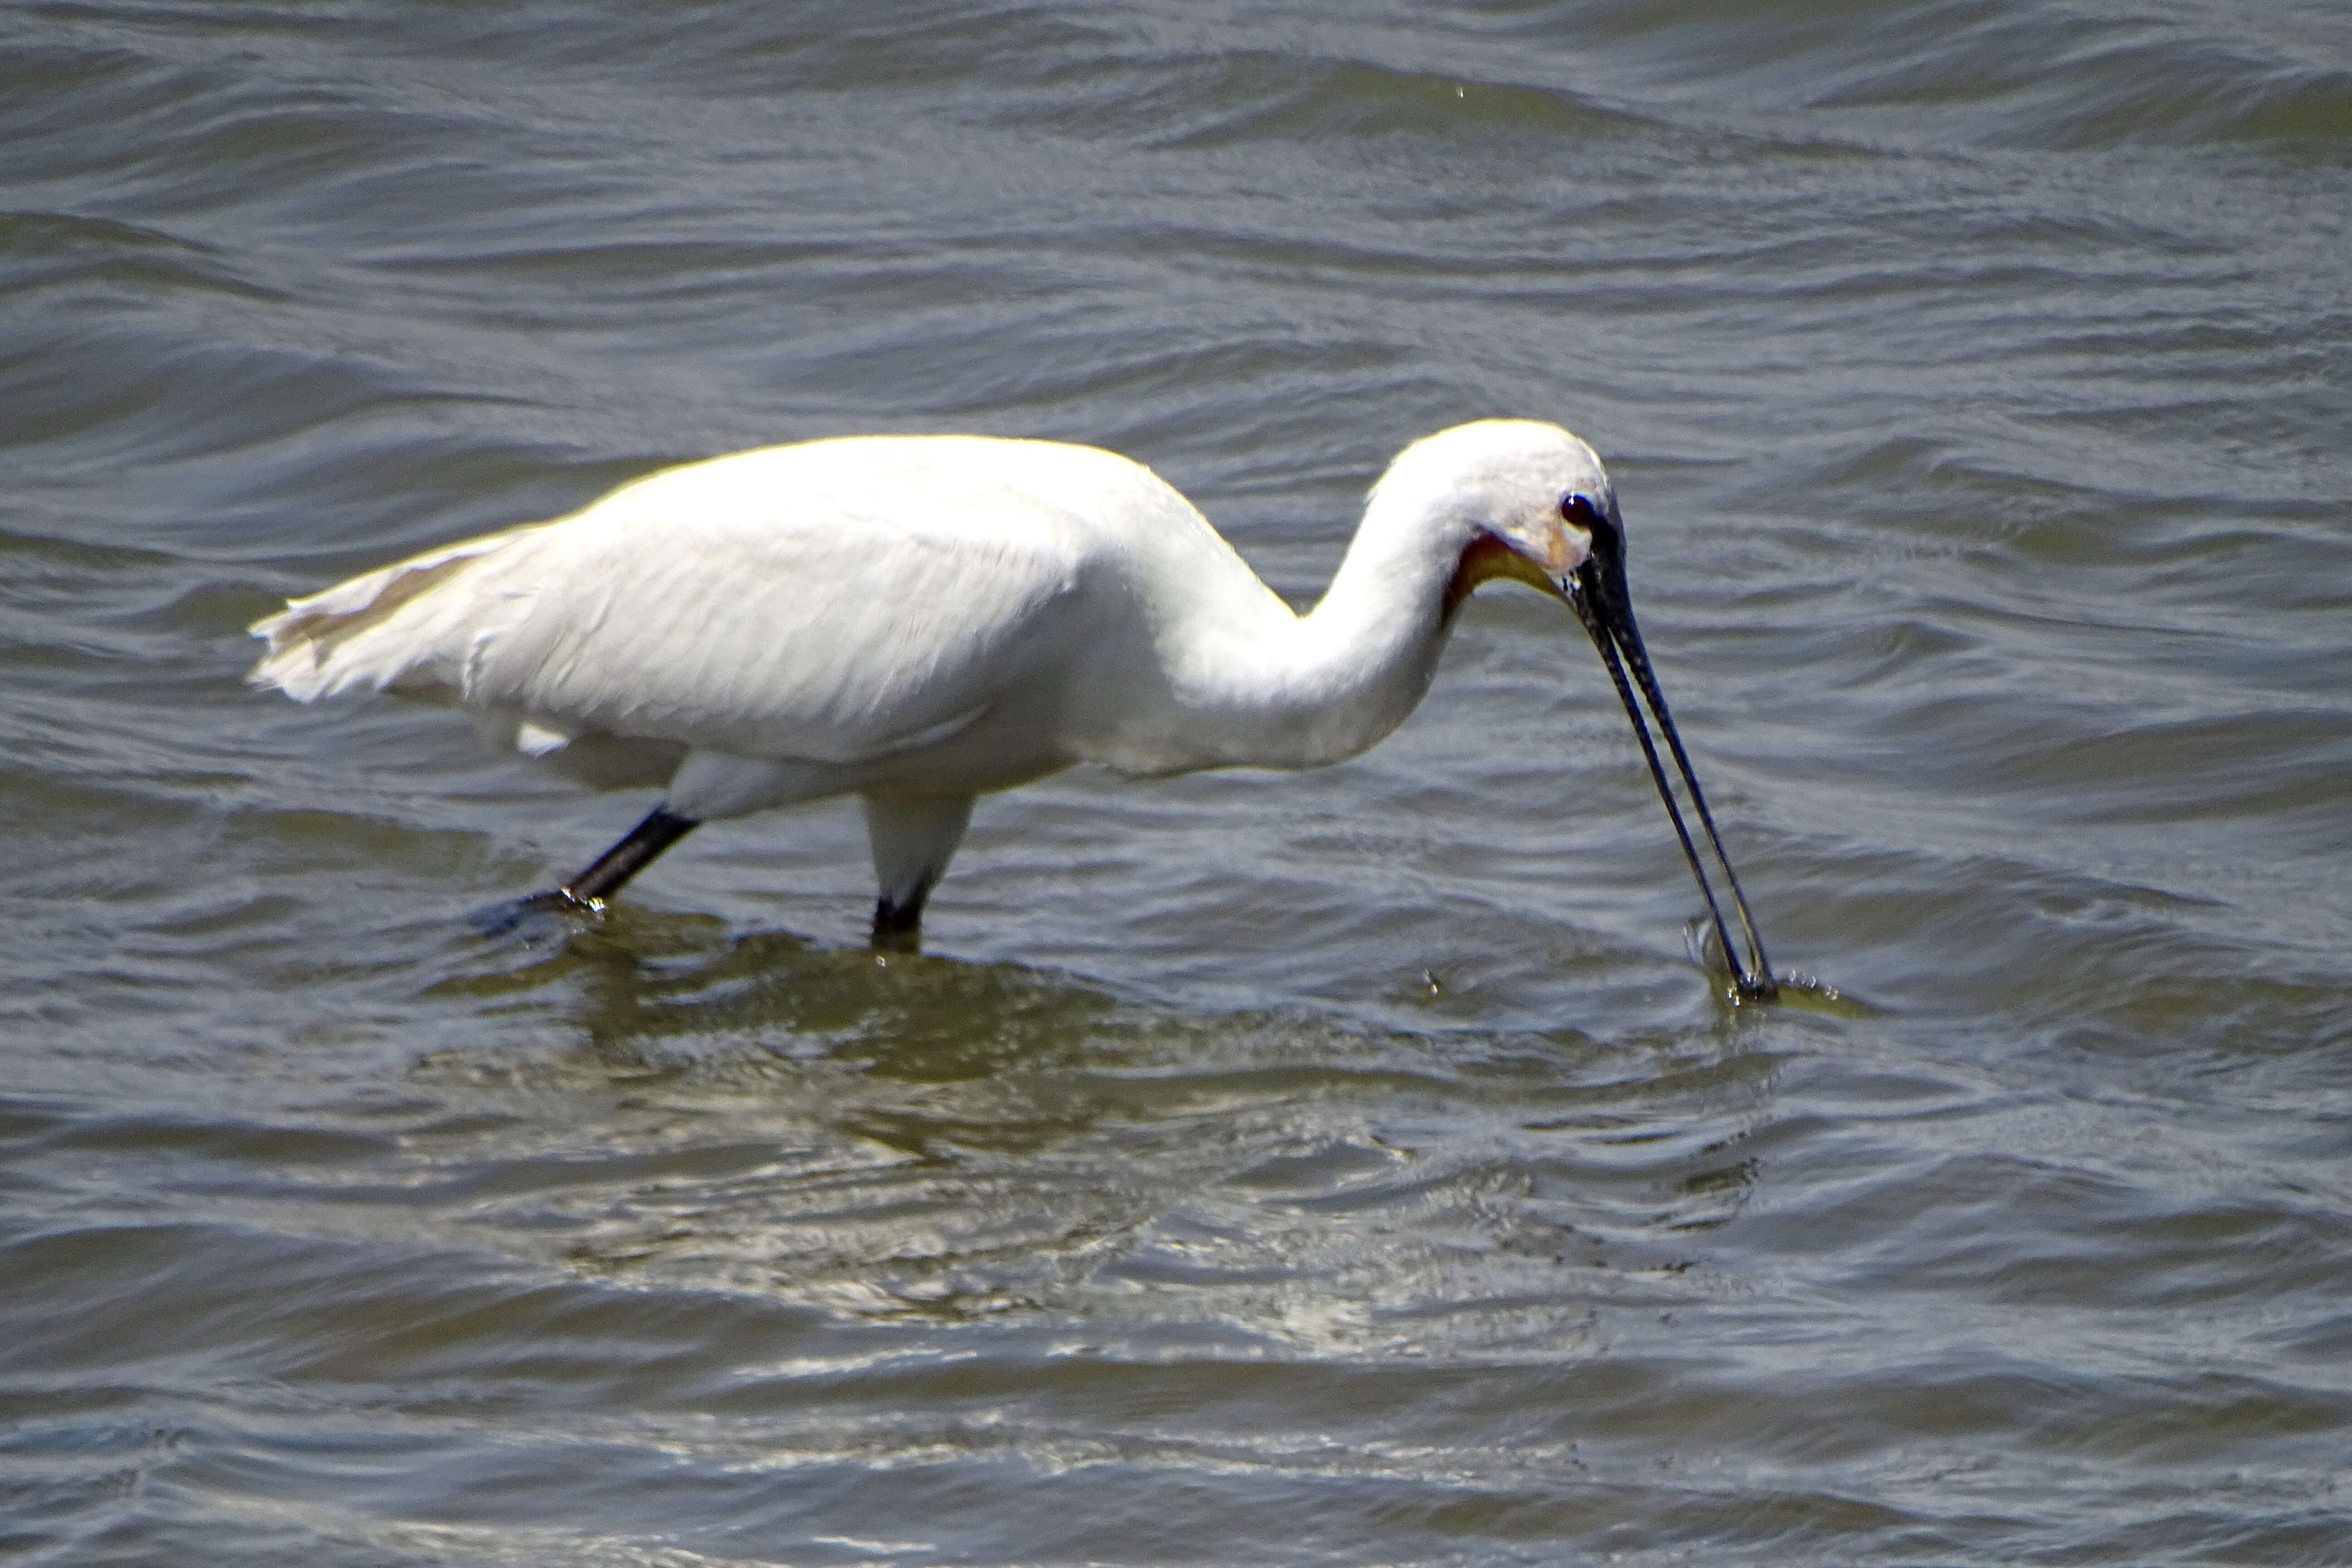 Image of ibises and spoonbills